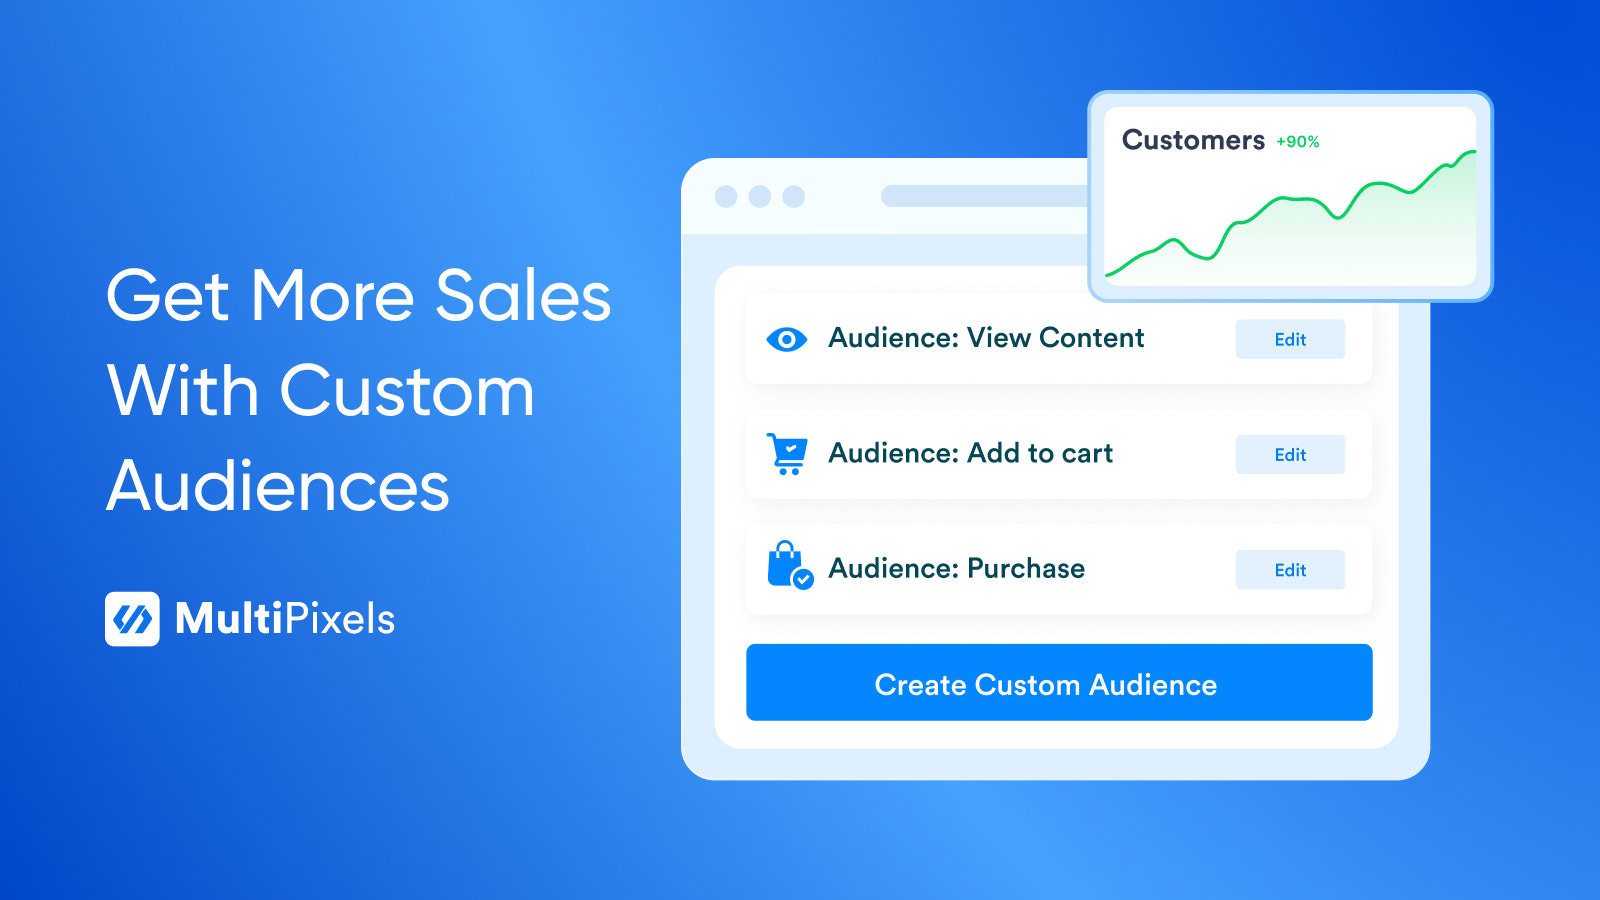 Get More Sales With Custom Audiences